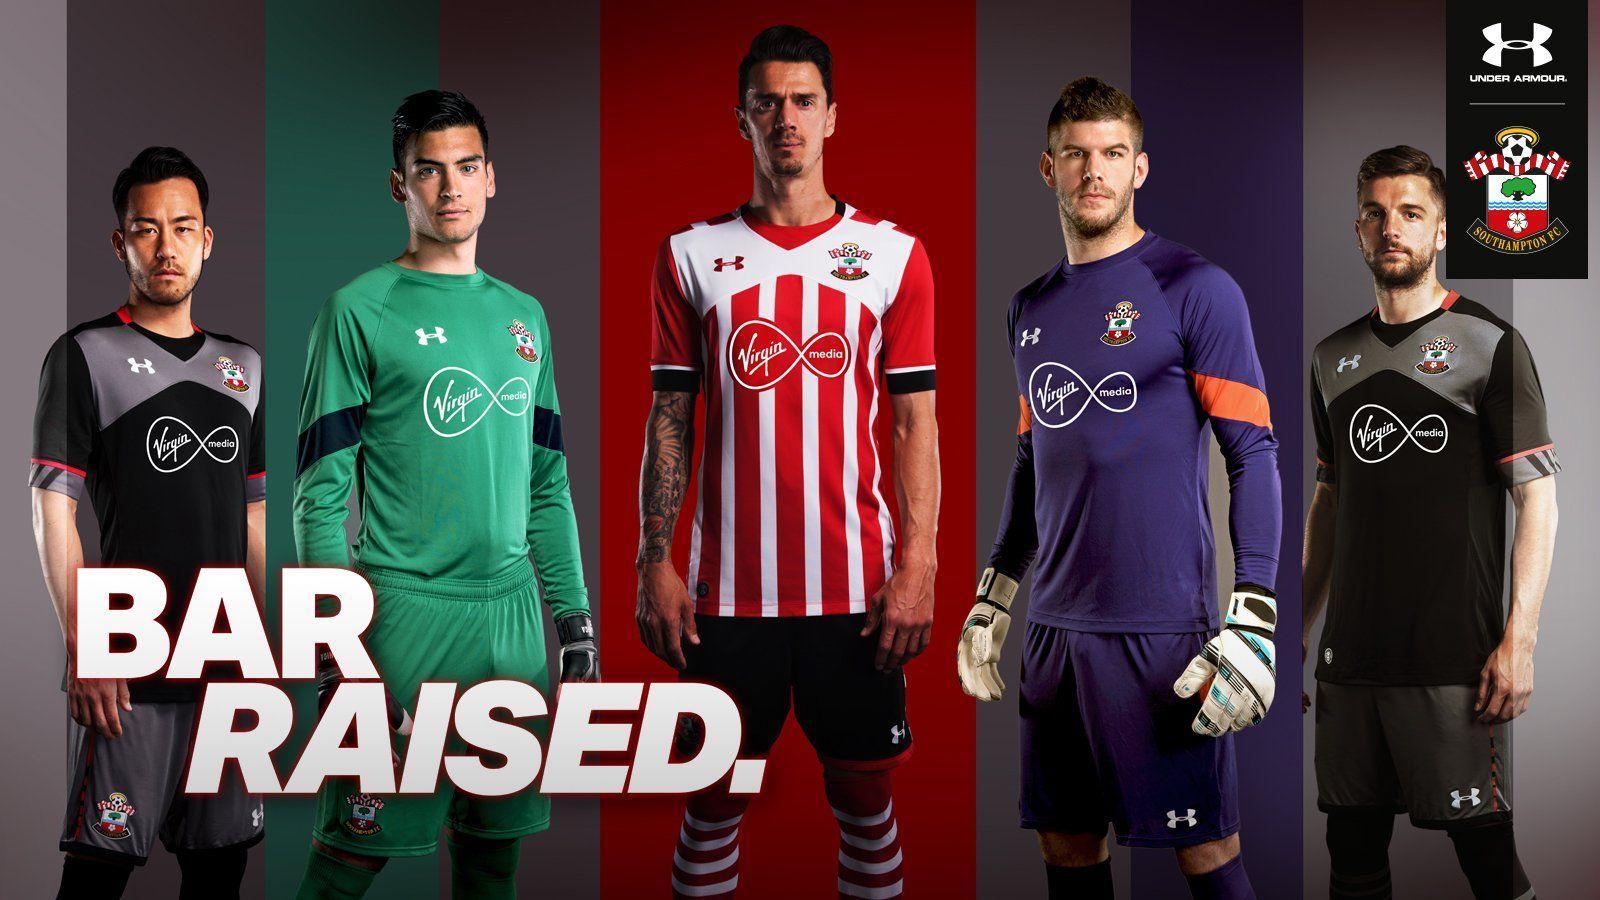 Under Armour Southampton 16 17 Kits Released